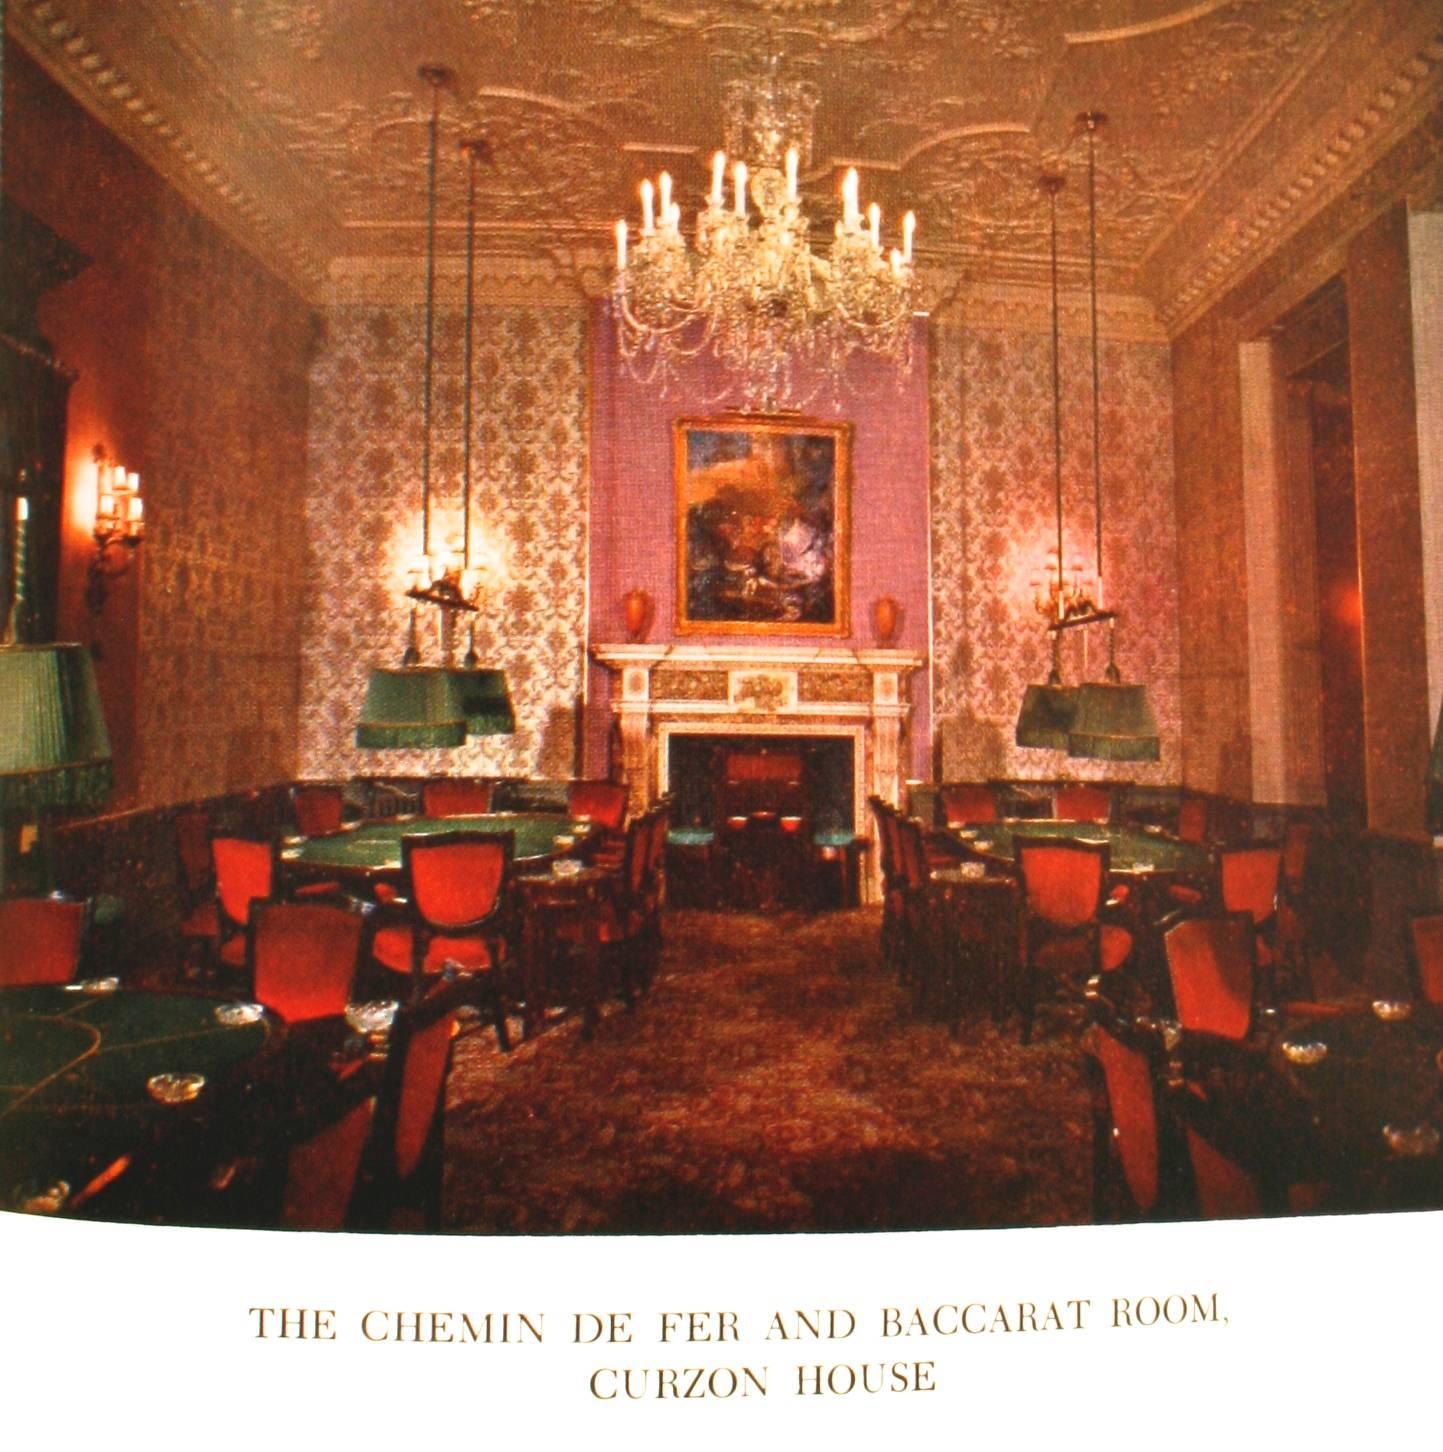 Paper Leather Armchairs, a Guide to the Great Clubs of London by Charles Graves